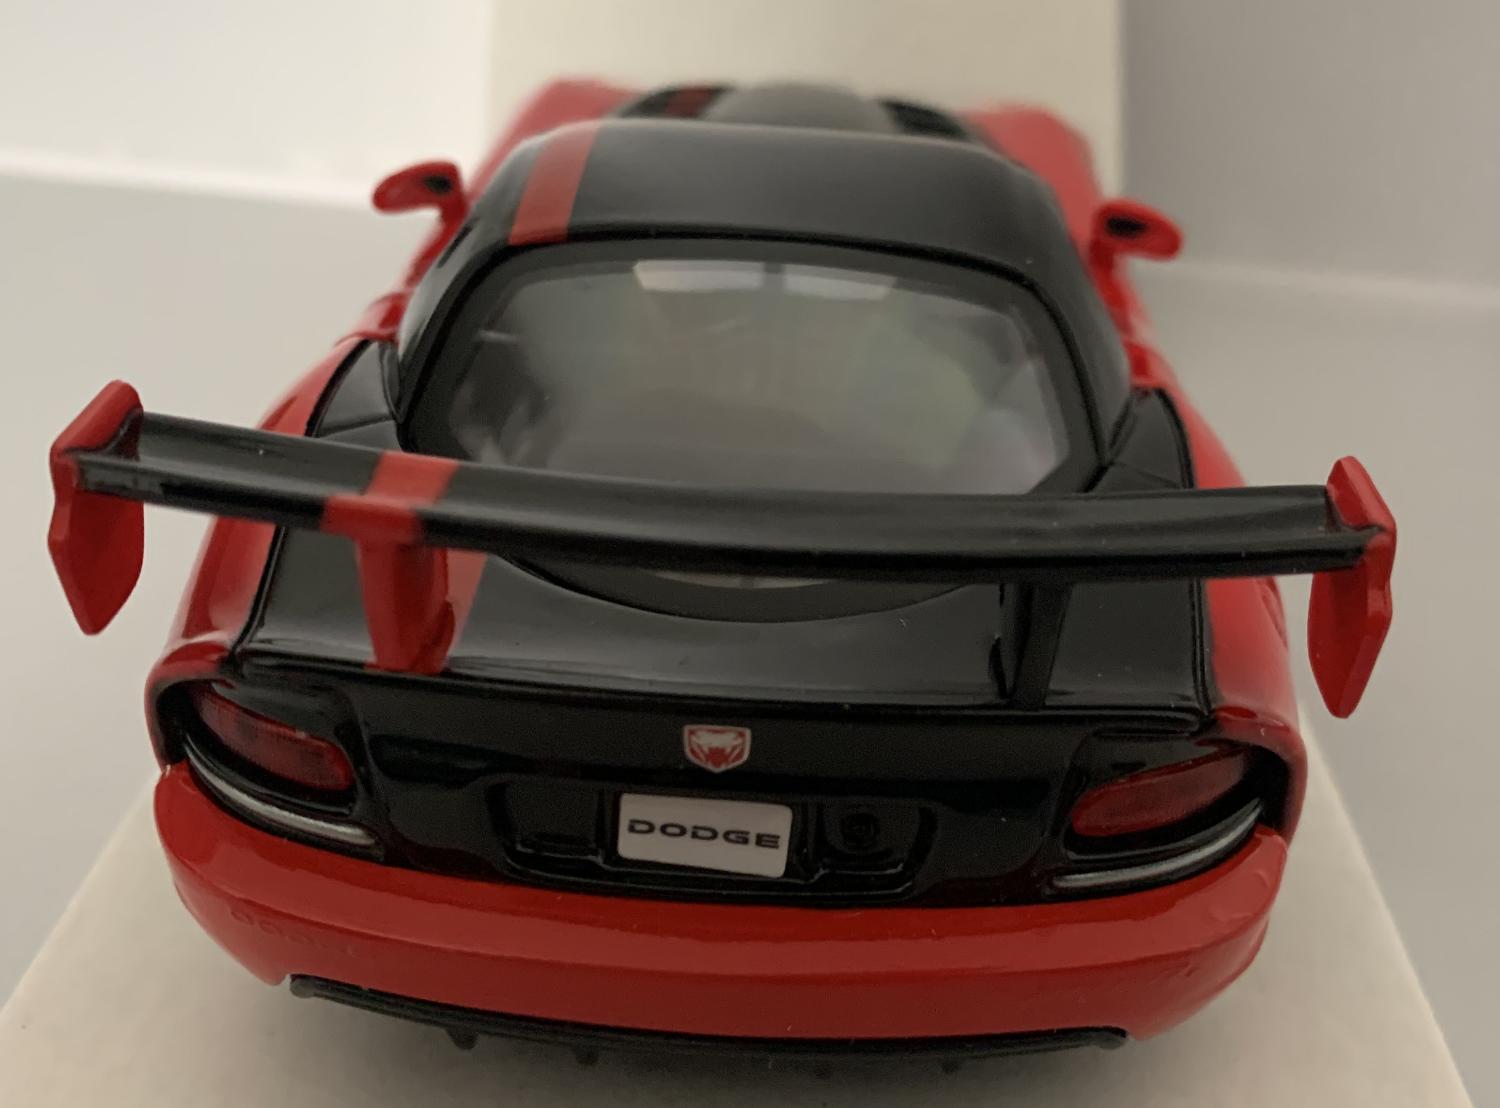 he Dodge Viper SRT 10 ACR is decorated in red and black with authentic graphics